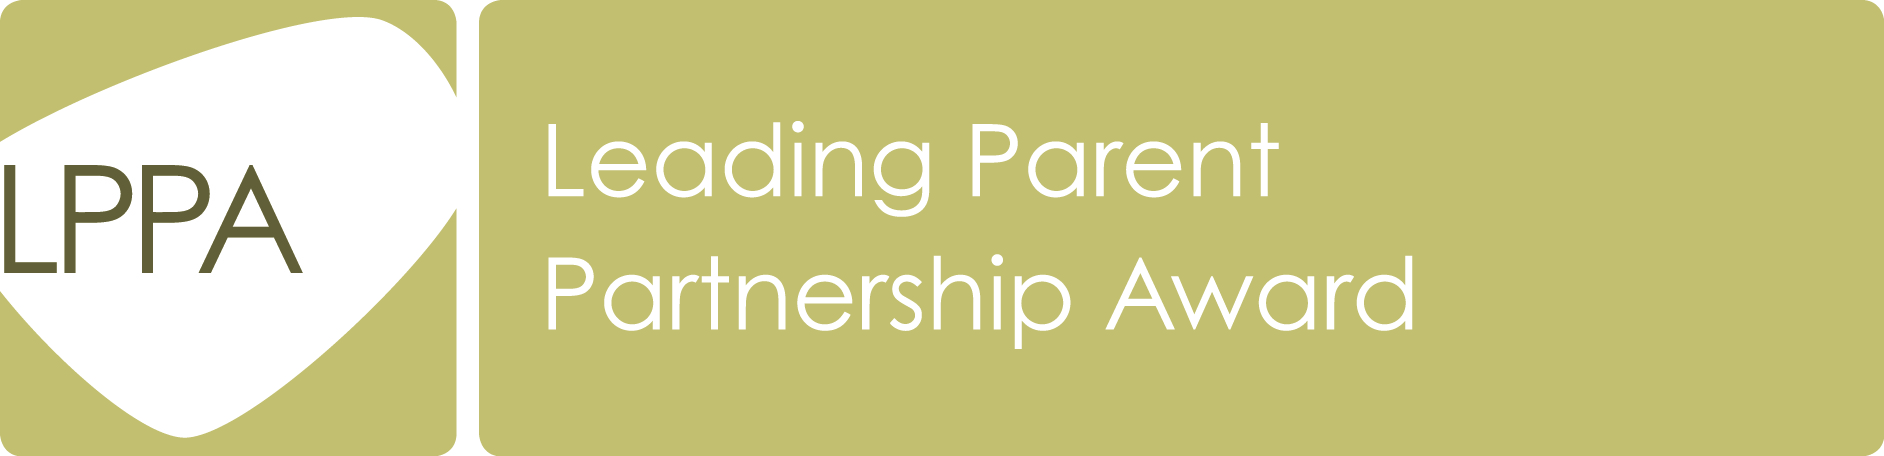 West Kirby School and College - Leading Parent Partnership Award